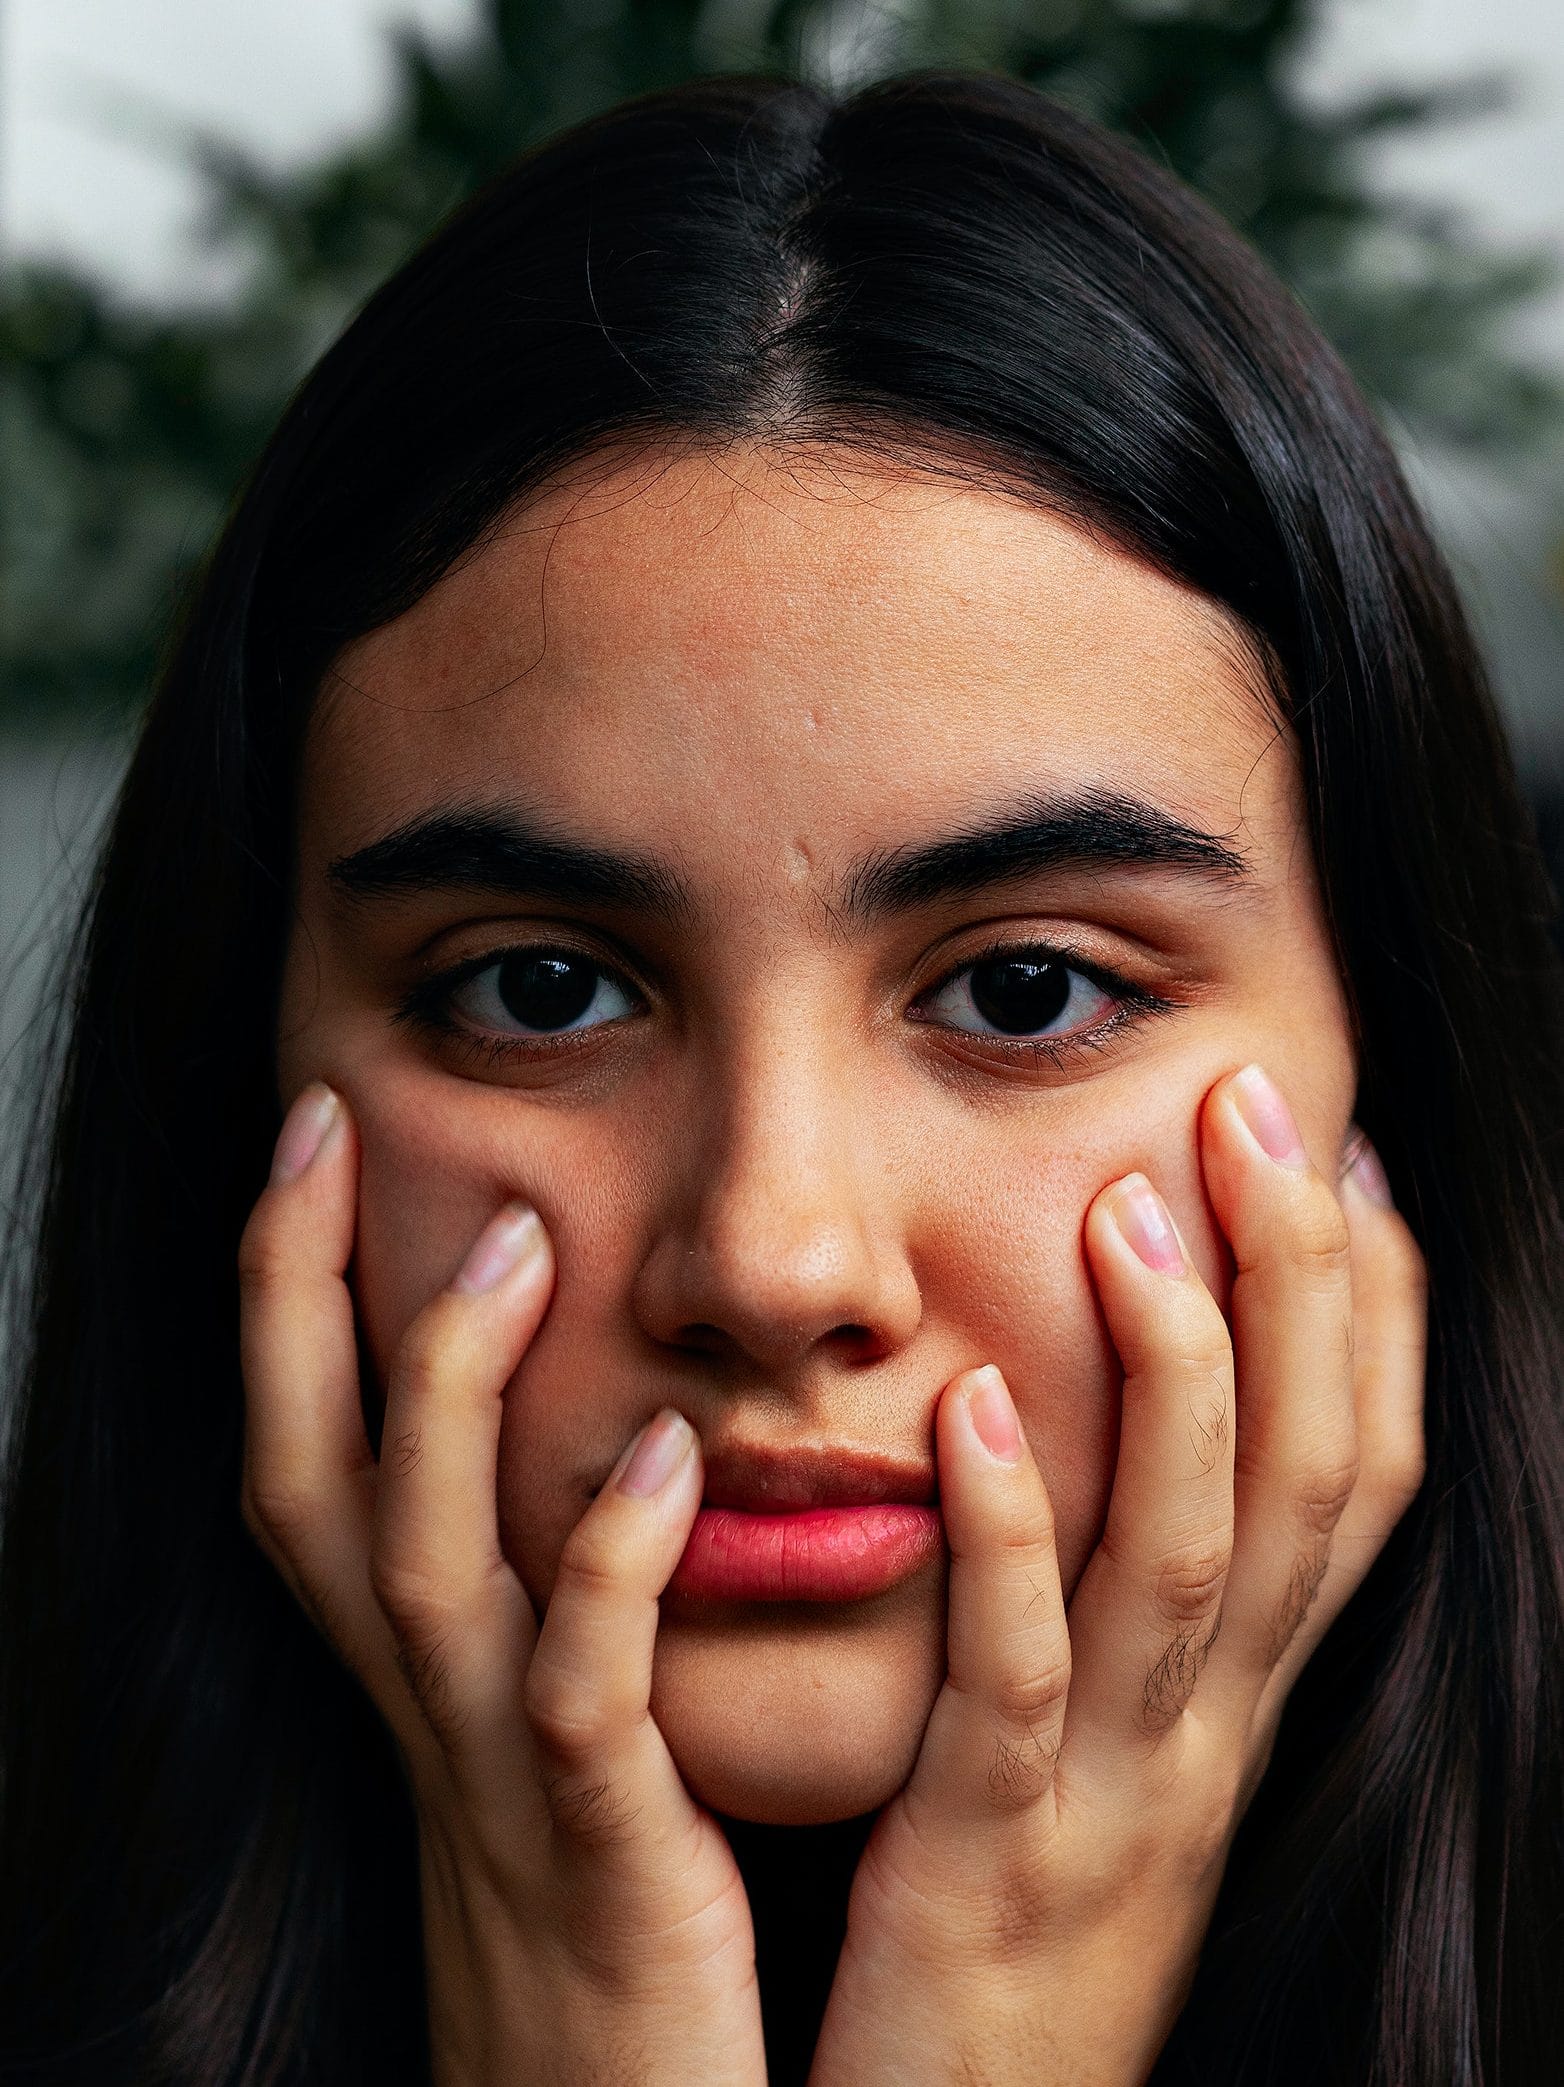 A brown skinned Latinx woman with dark hair is photographed close up. She is holding her face in her hands with a serious expression on her face.